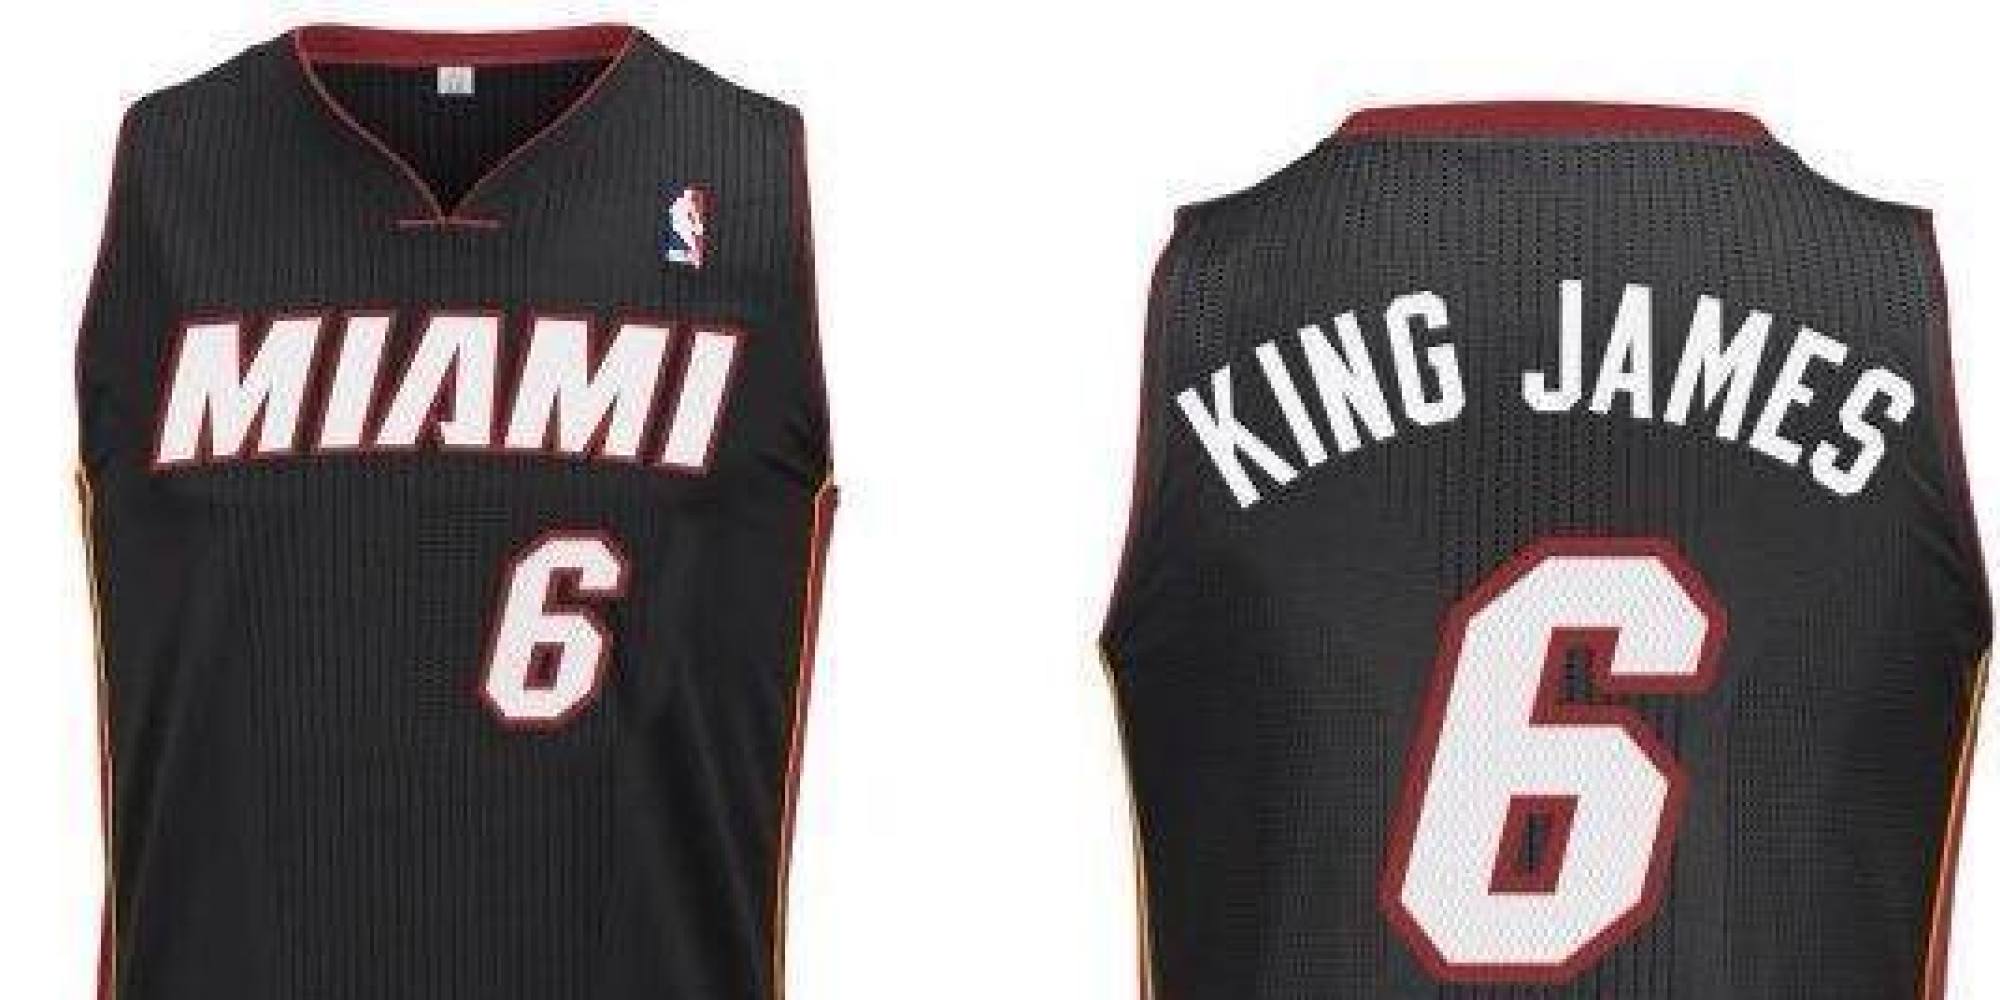 Miami Heat Jerseys May Use Nicknames For A Few Games This Season (VIDEO